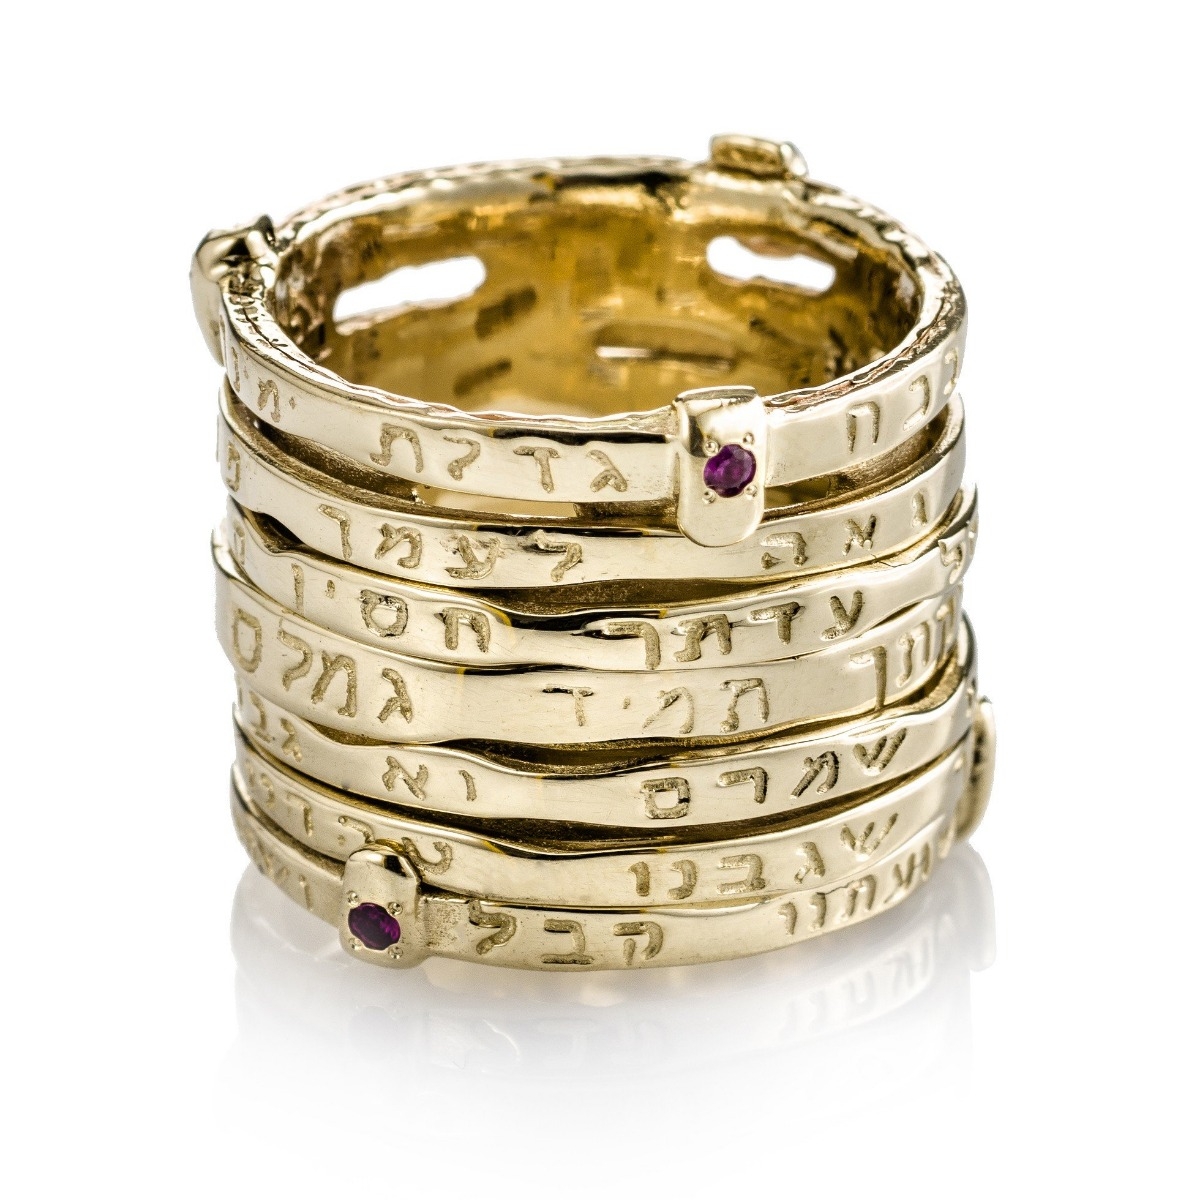 14K Yellow Gold Stacked Ring With Mystical Verses and Ruby Stones - 1